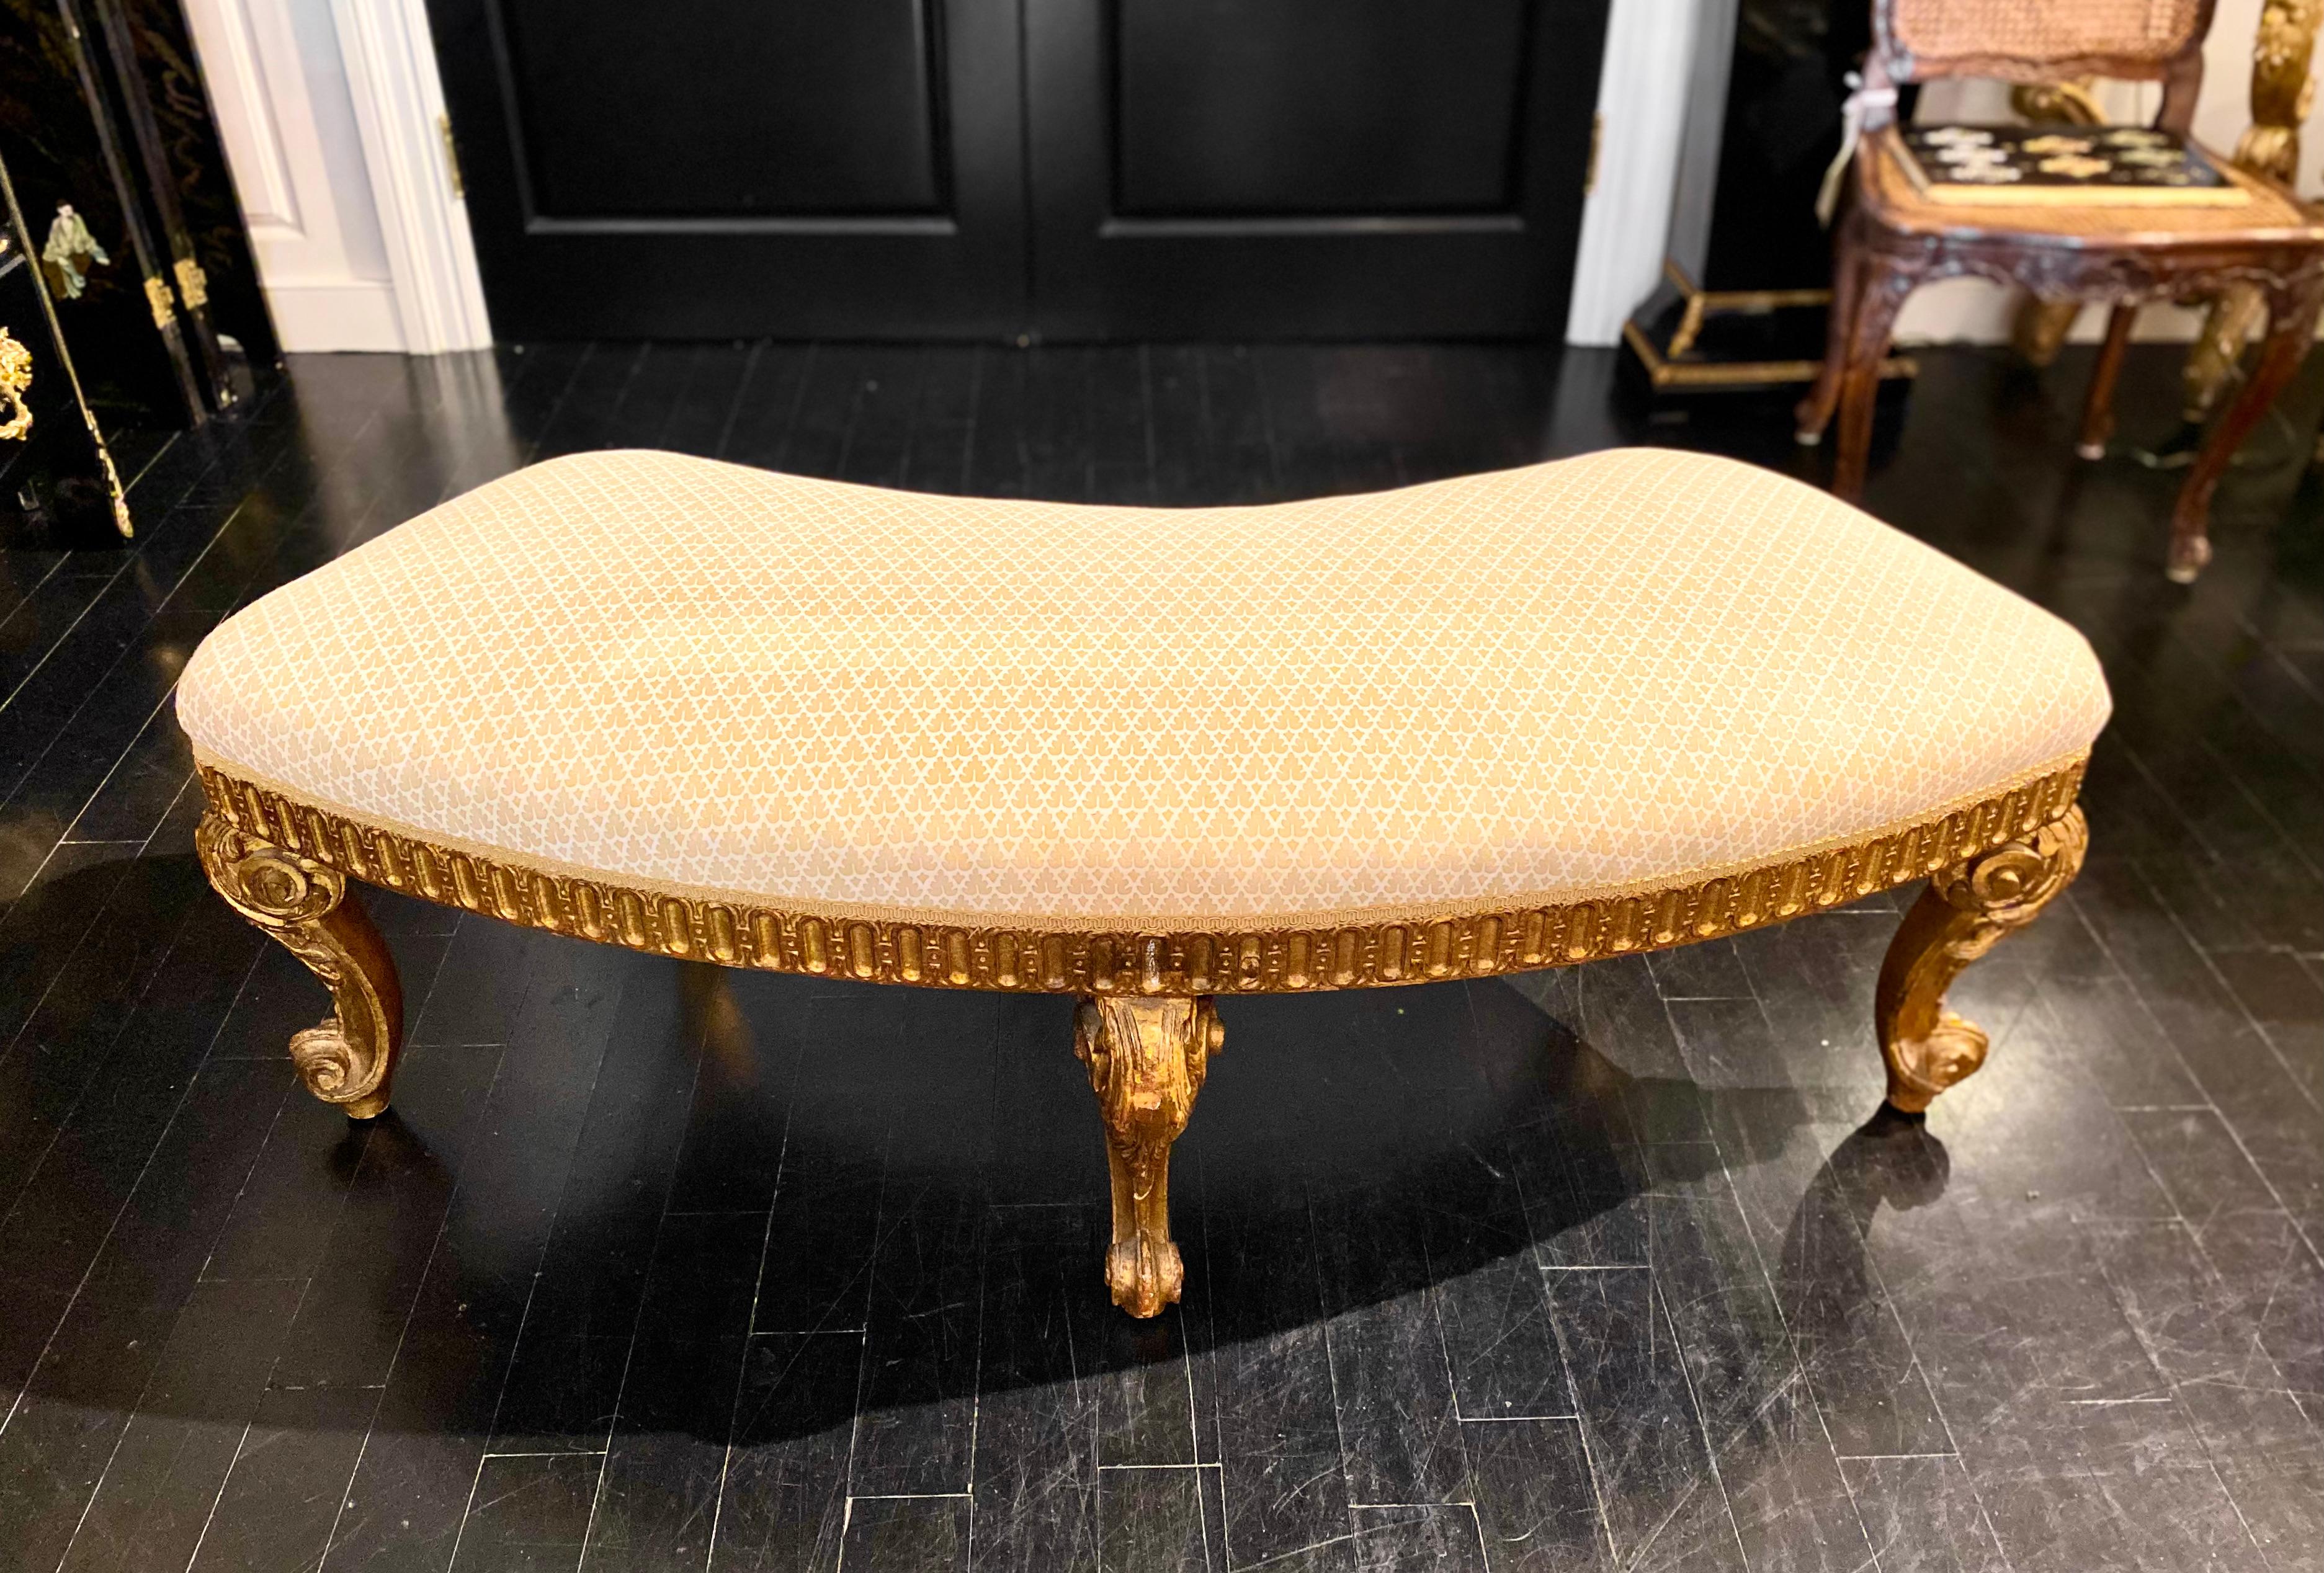 Wood French Louis XVI Style Giltwood Semi-Circular Bench, Jacob-Inspired Model For Sale